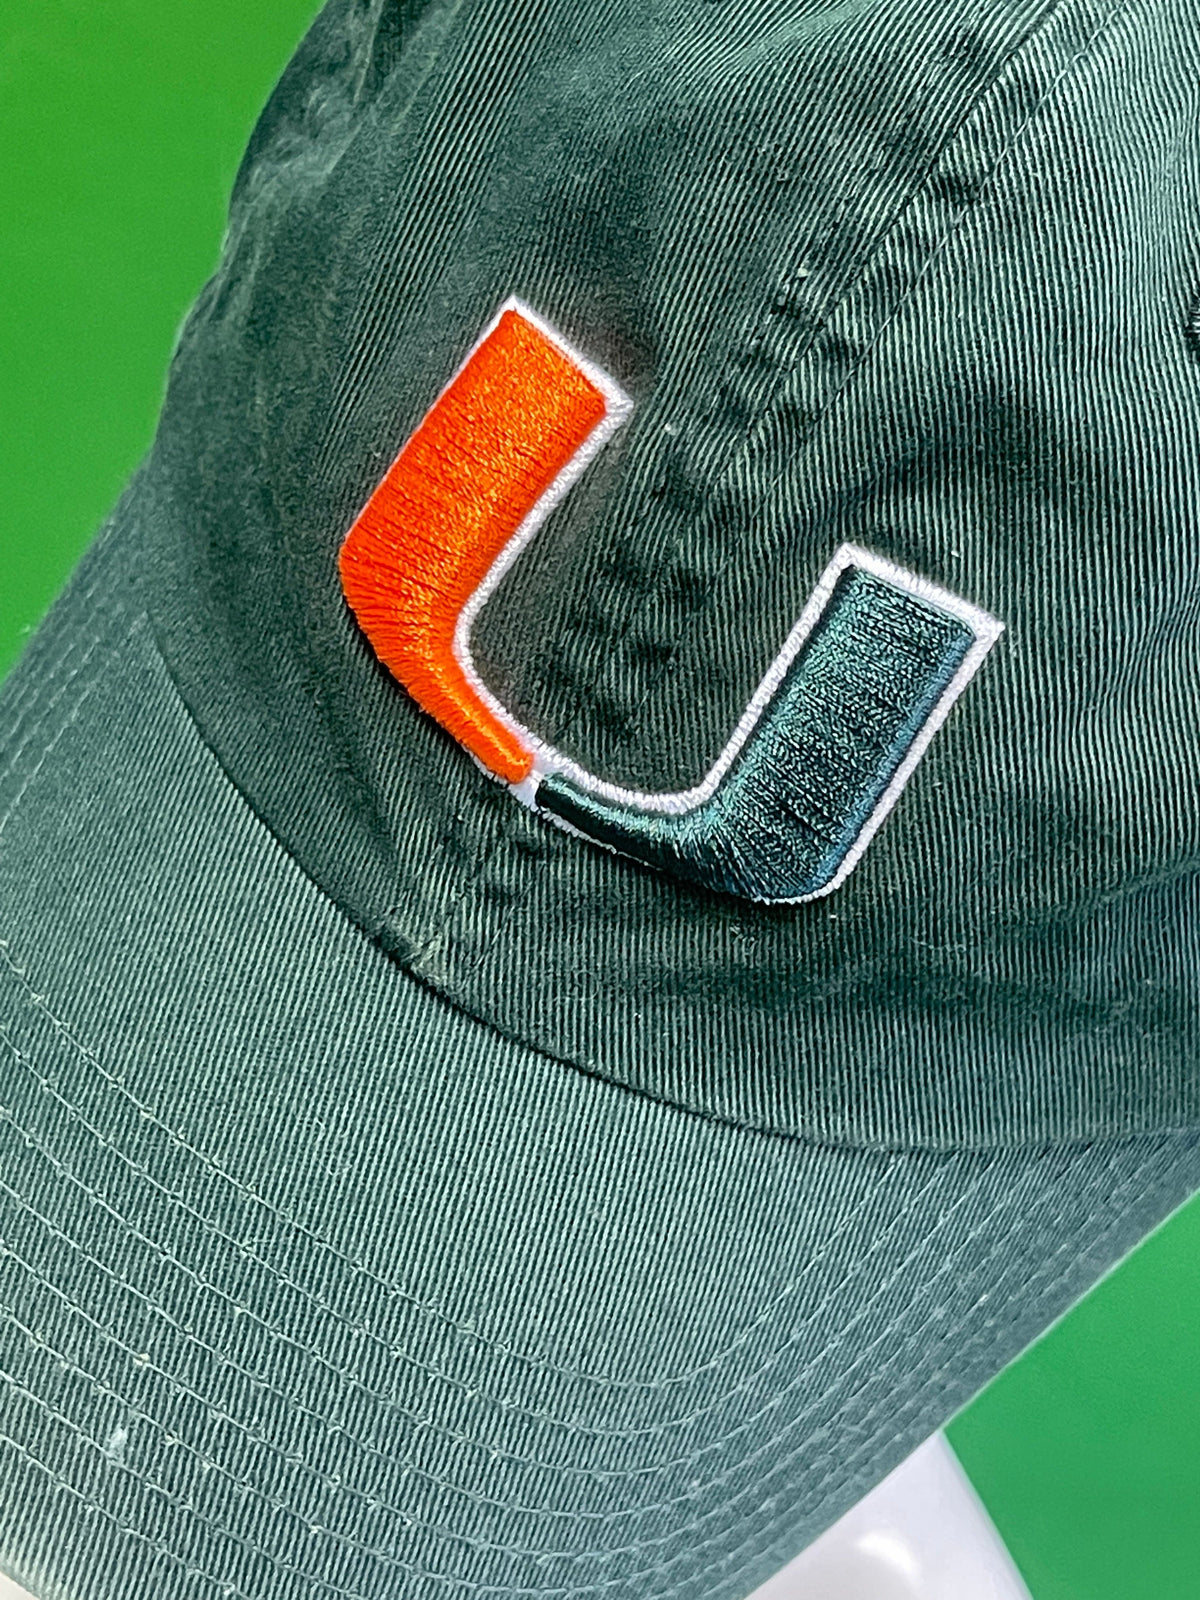 NCAA Miami Hurricanes Fitted Hat/Cap X-Large